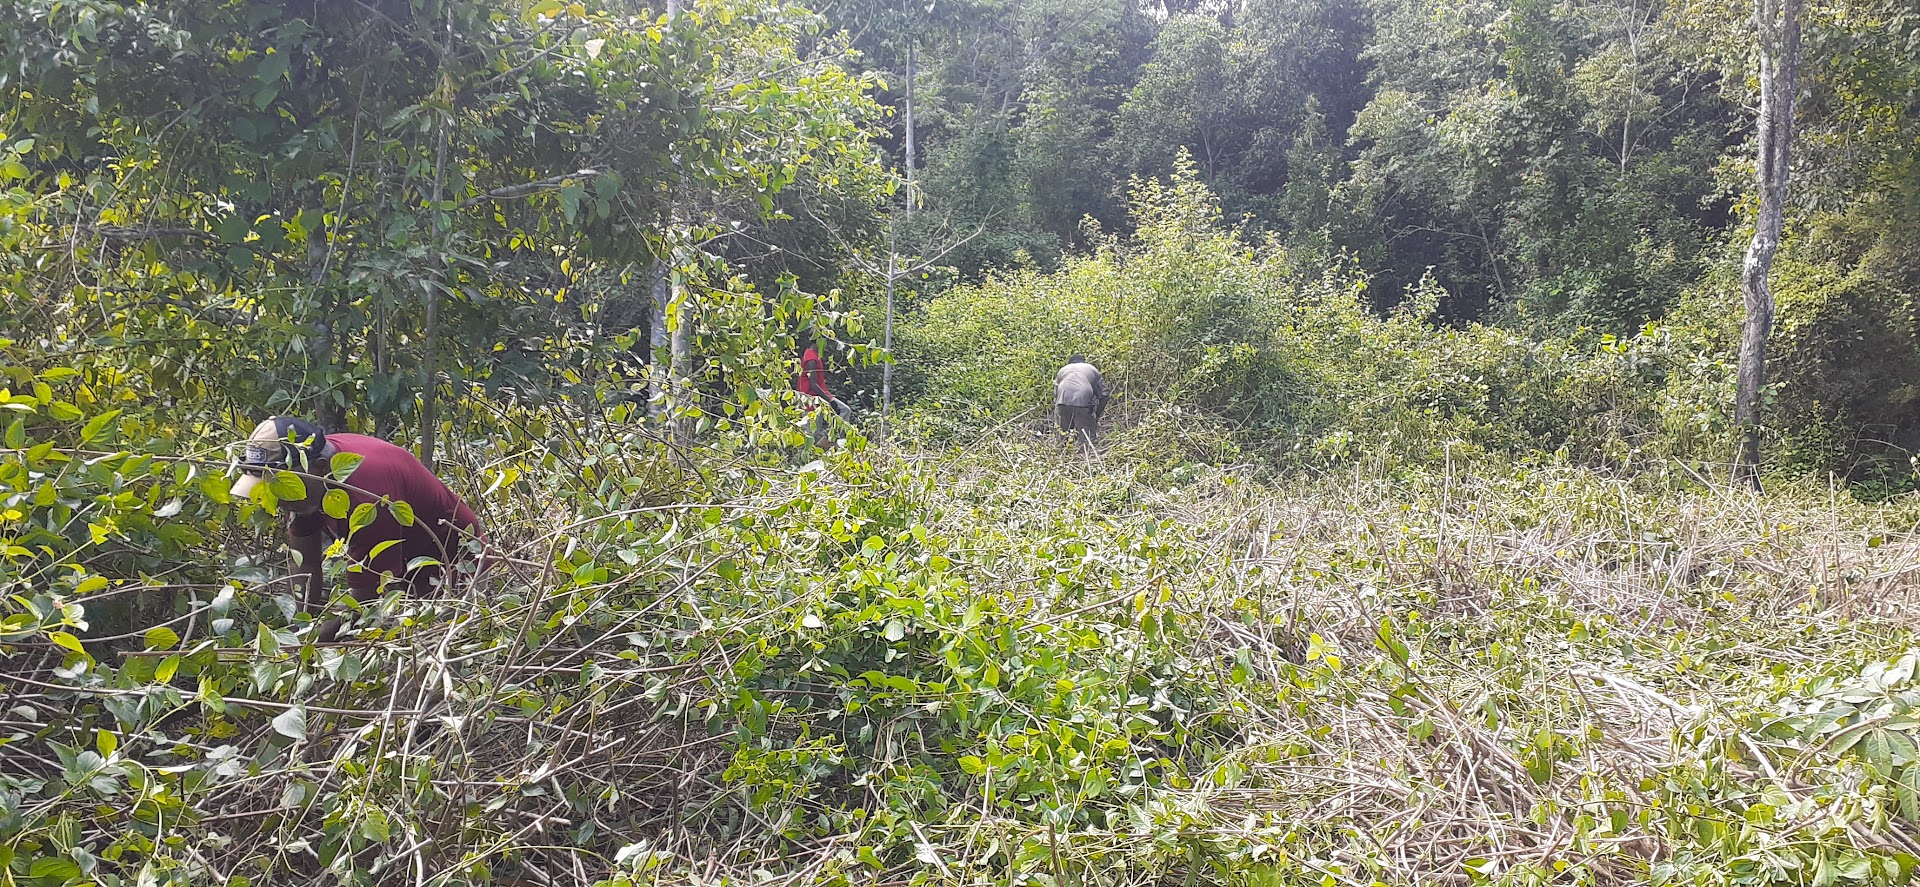 Ranger stands amongst tall weeds slashing with a machete